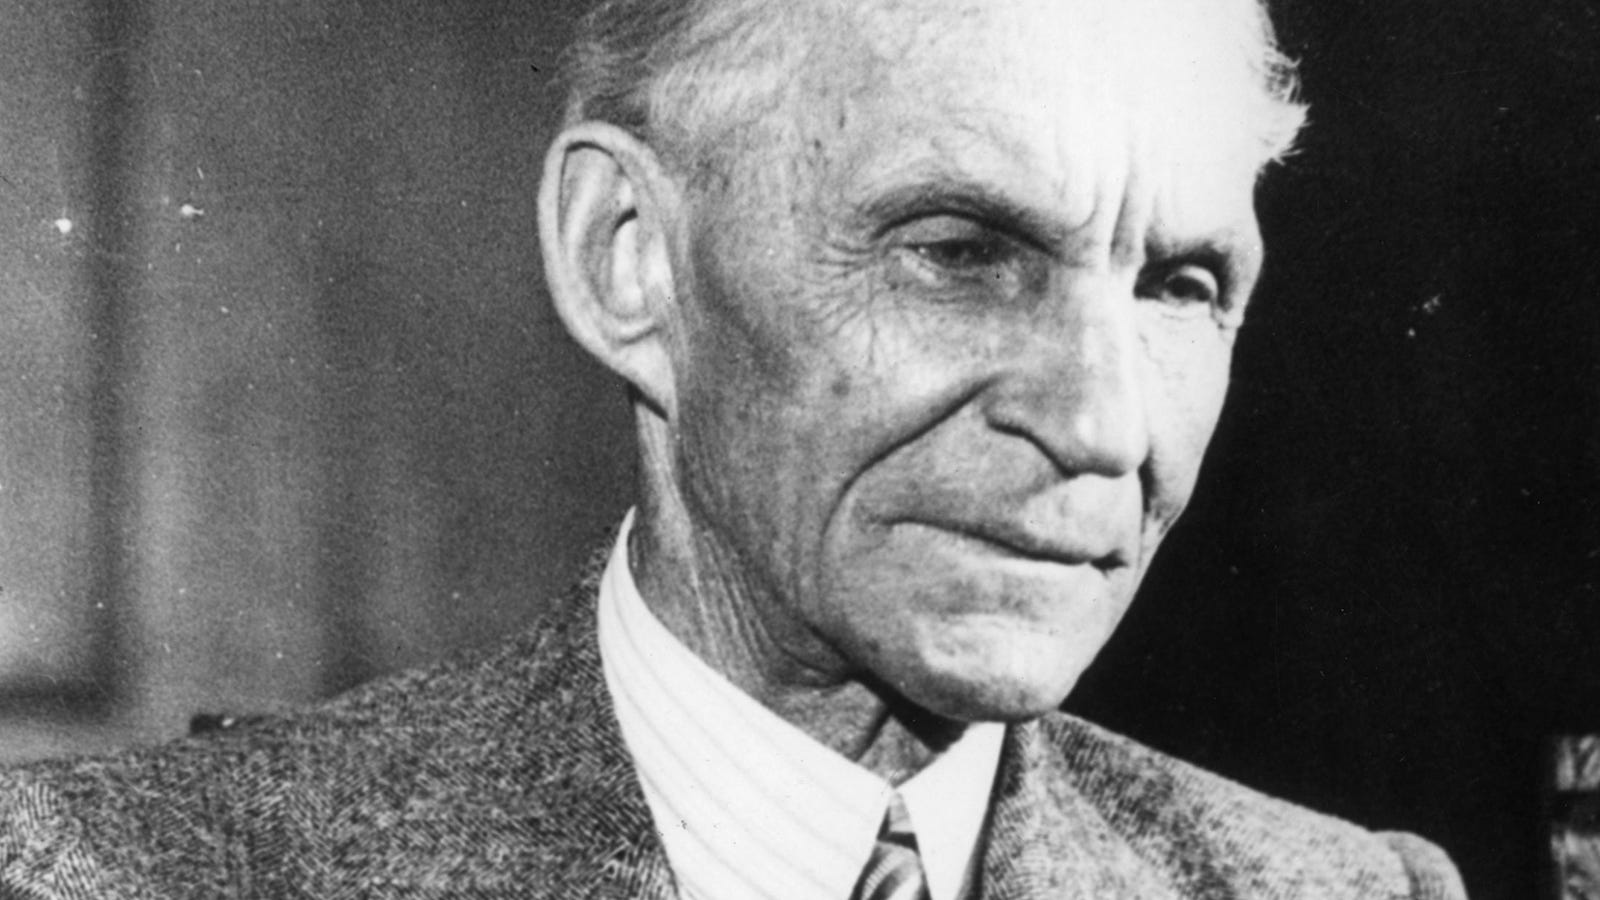 Henry Ford Plotted To Destroy Black, Jewish Jazz With Country Music